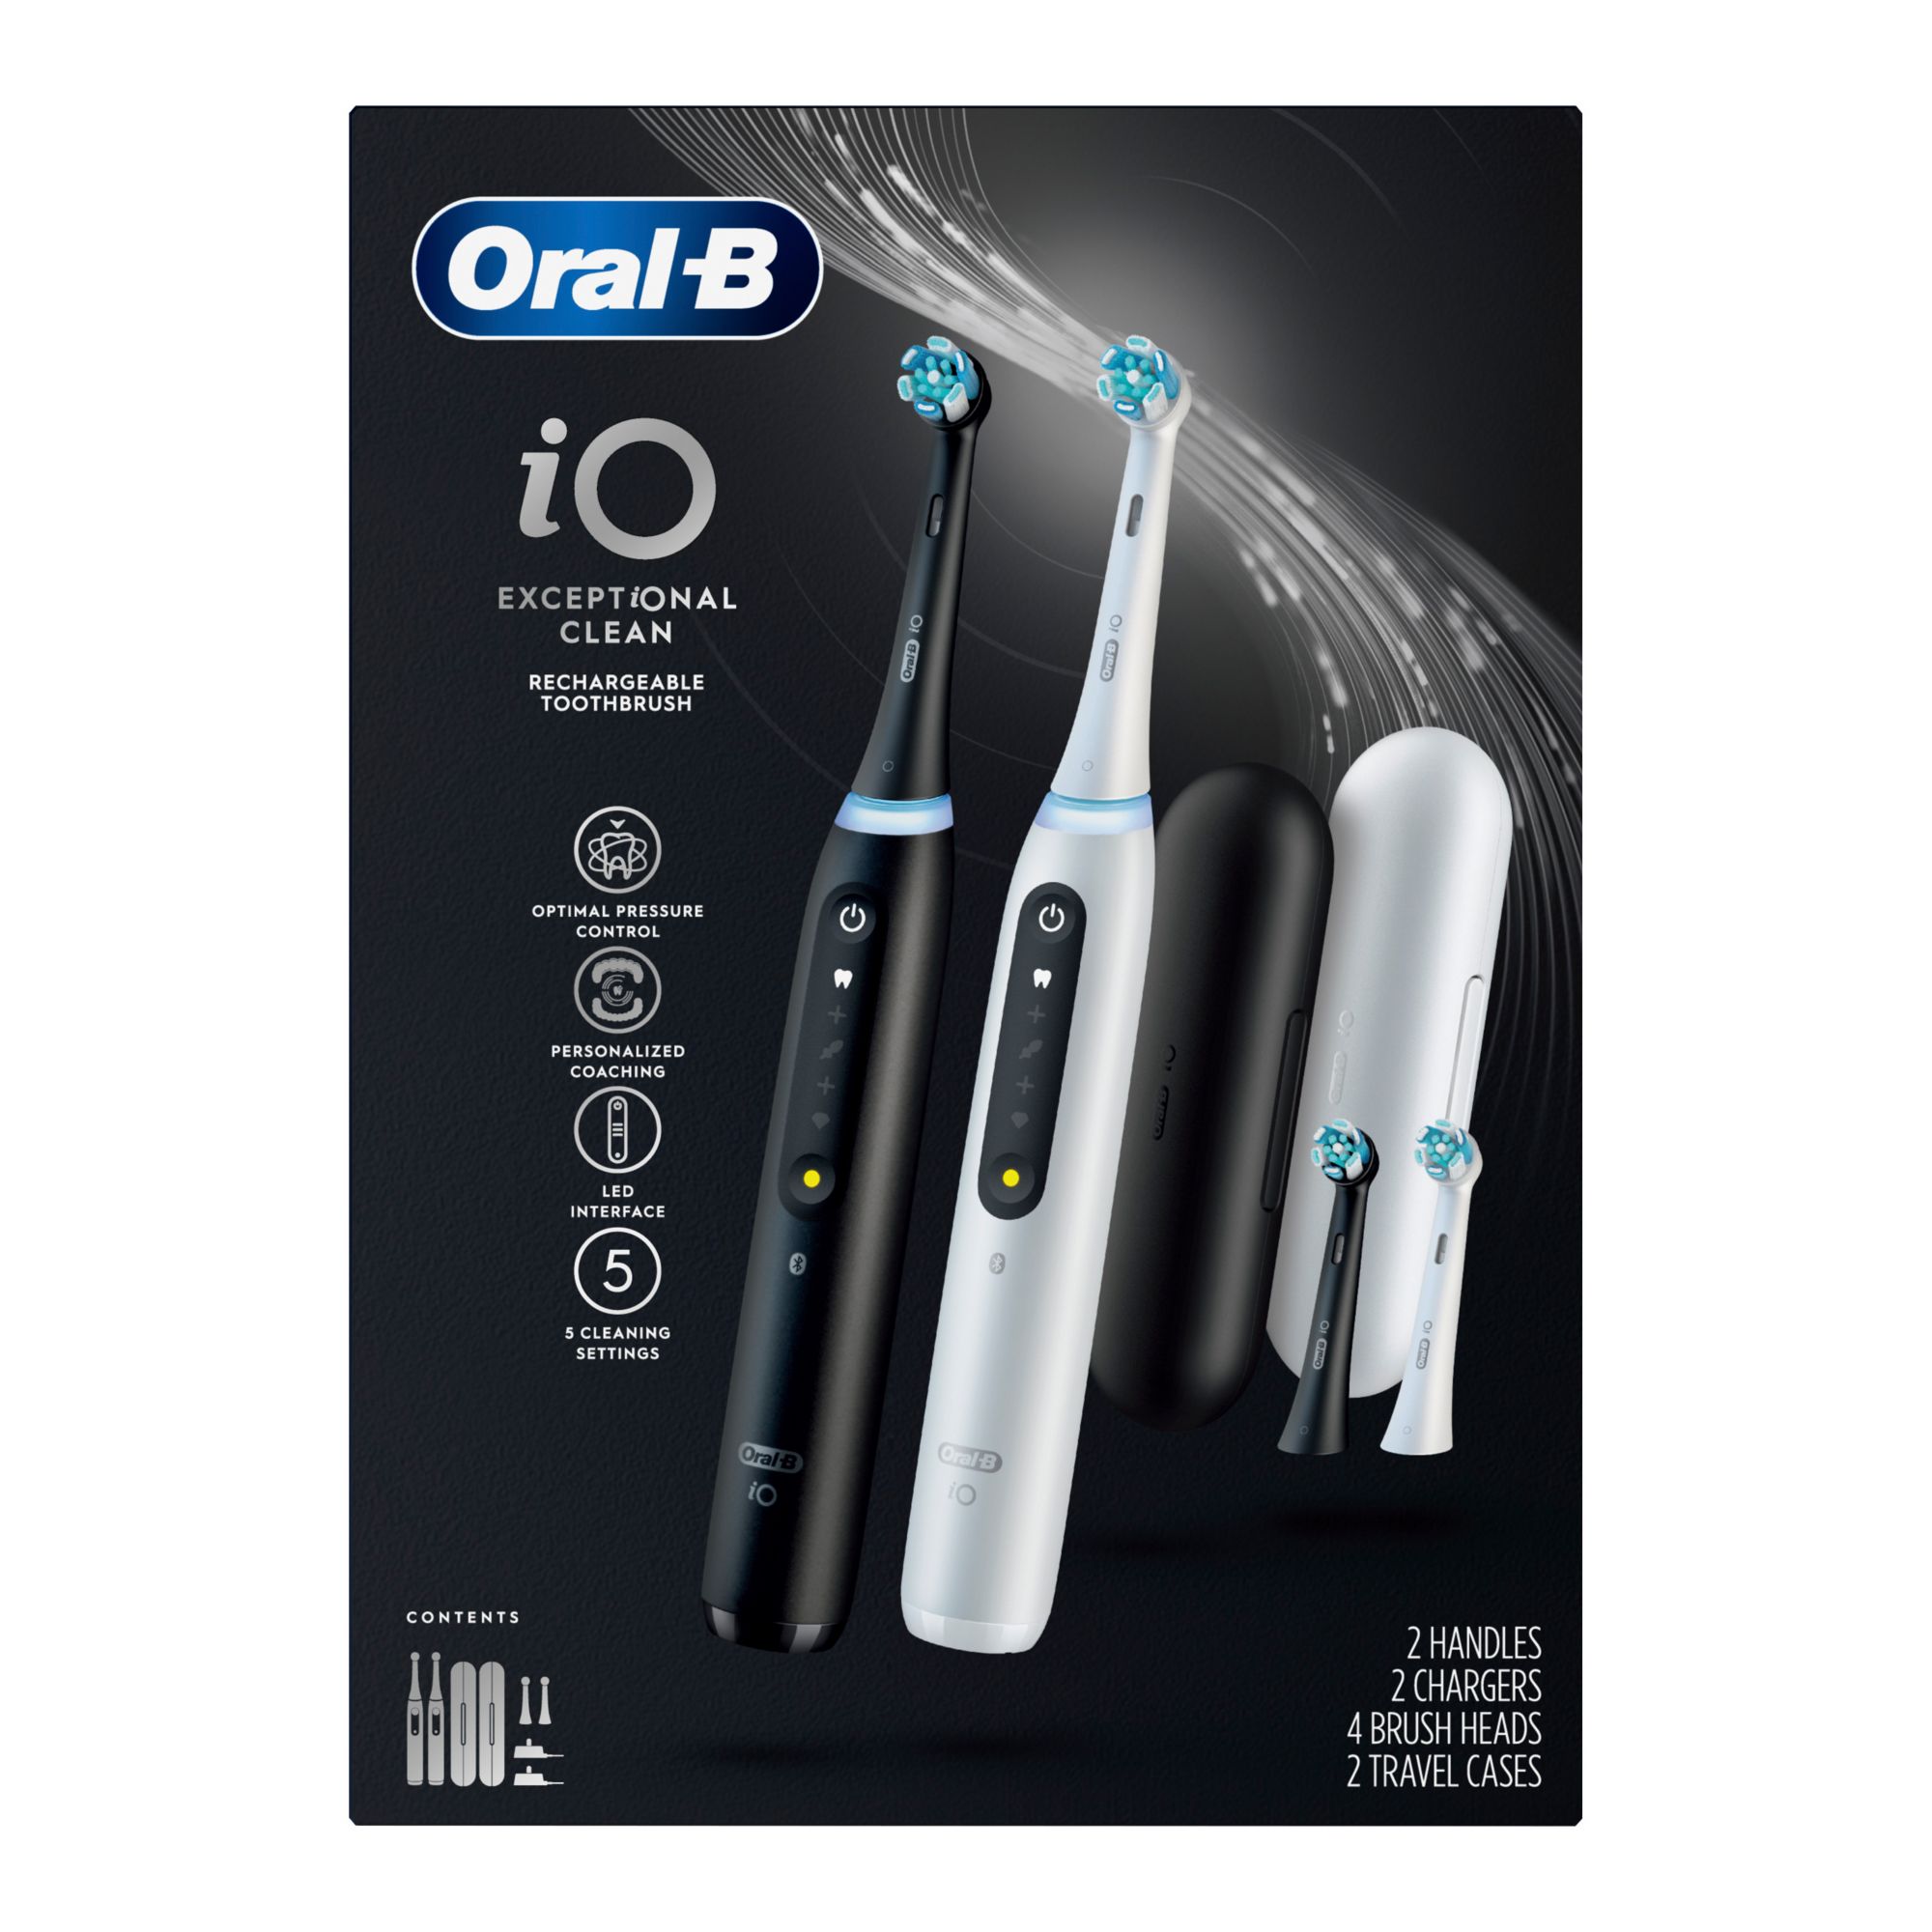 Oral-B iO Series 5 Electric Toothbrush is 55% off on